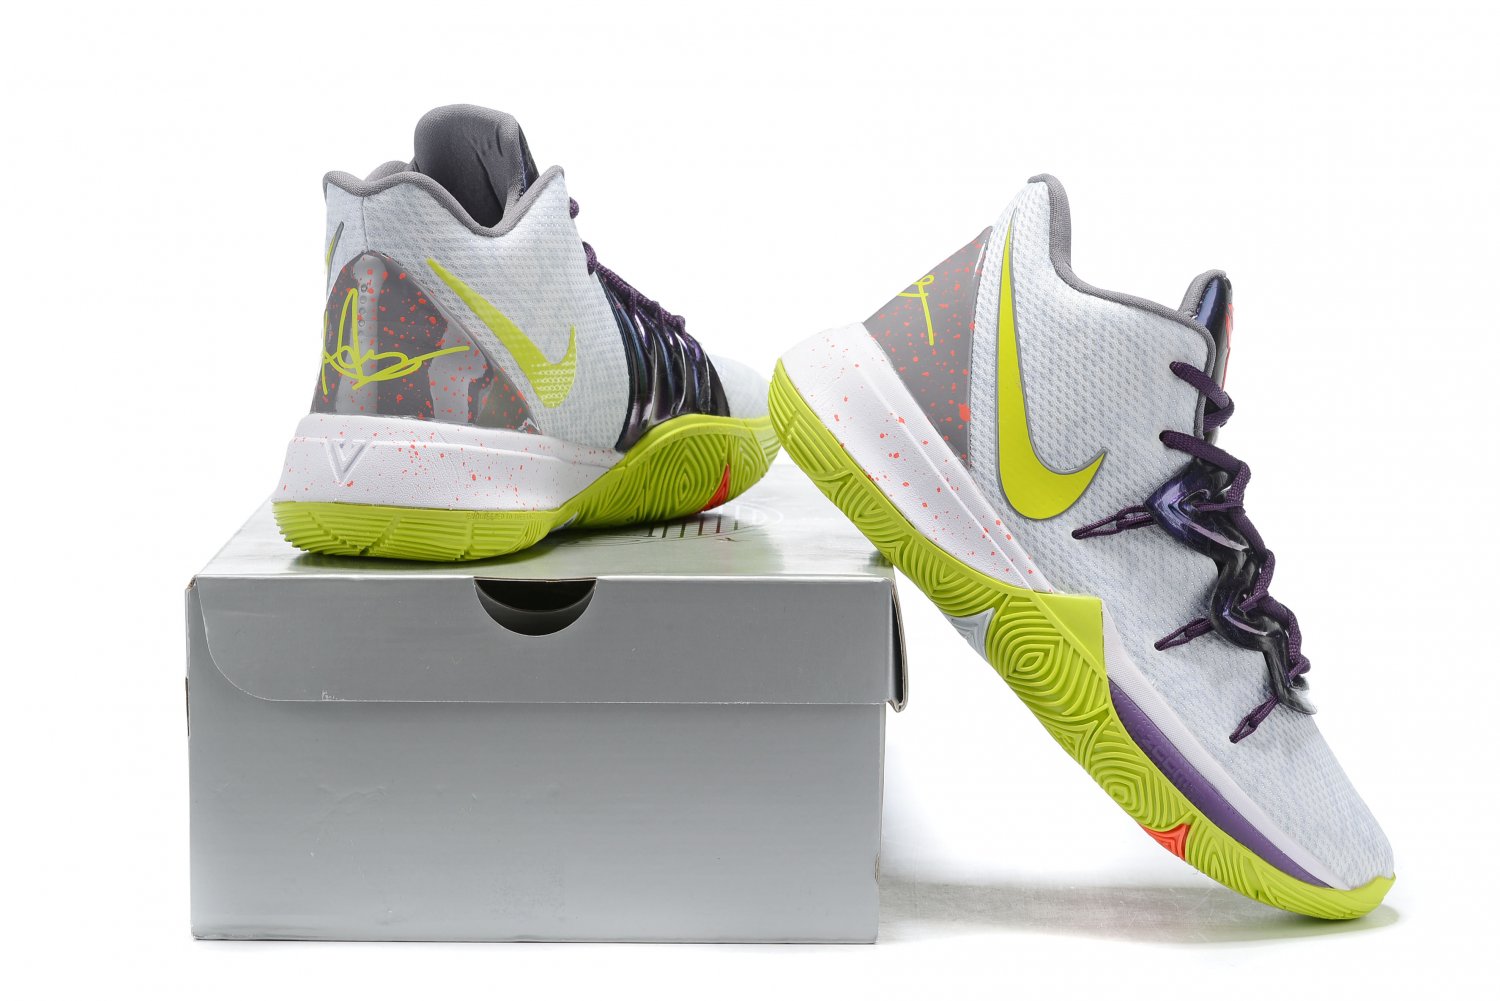 Concepts x Nike Kyrie 5 Ikhet? For Sale? With Sneaker